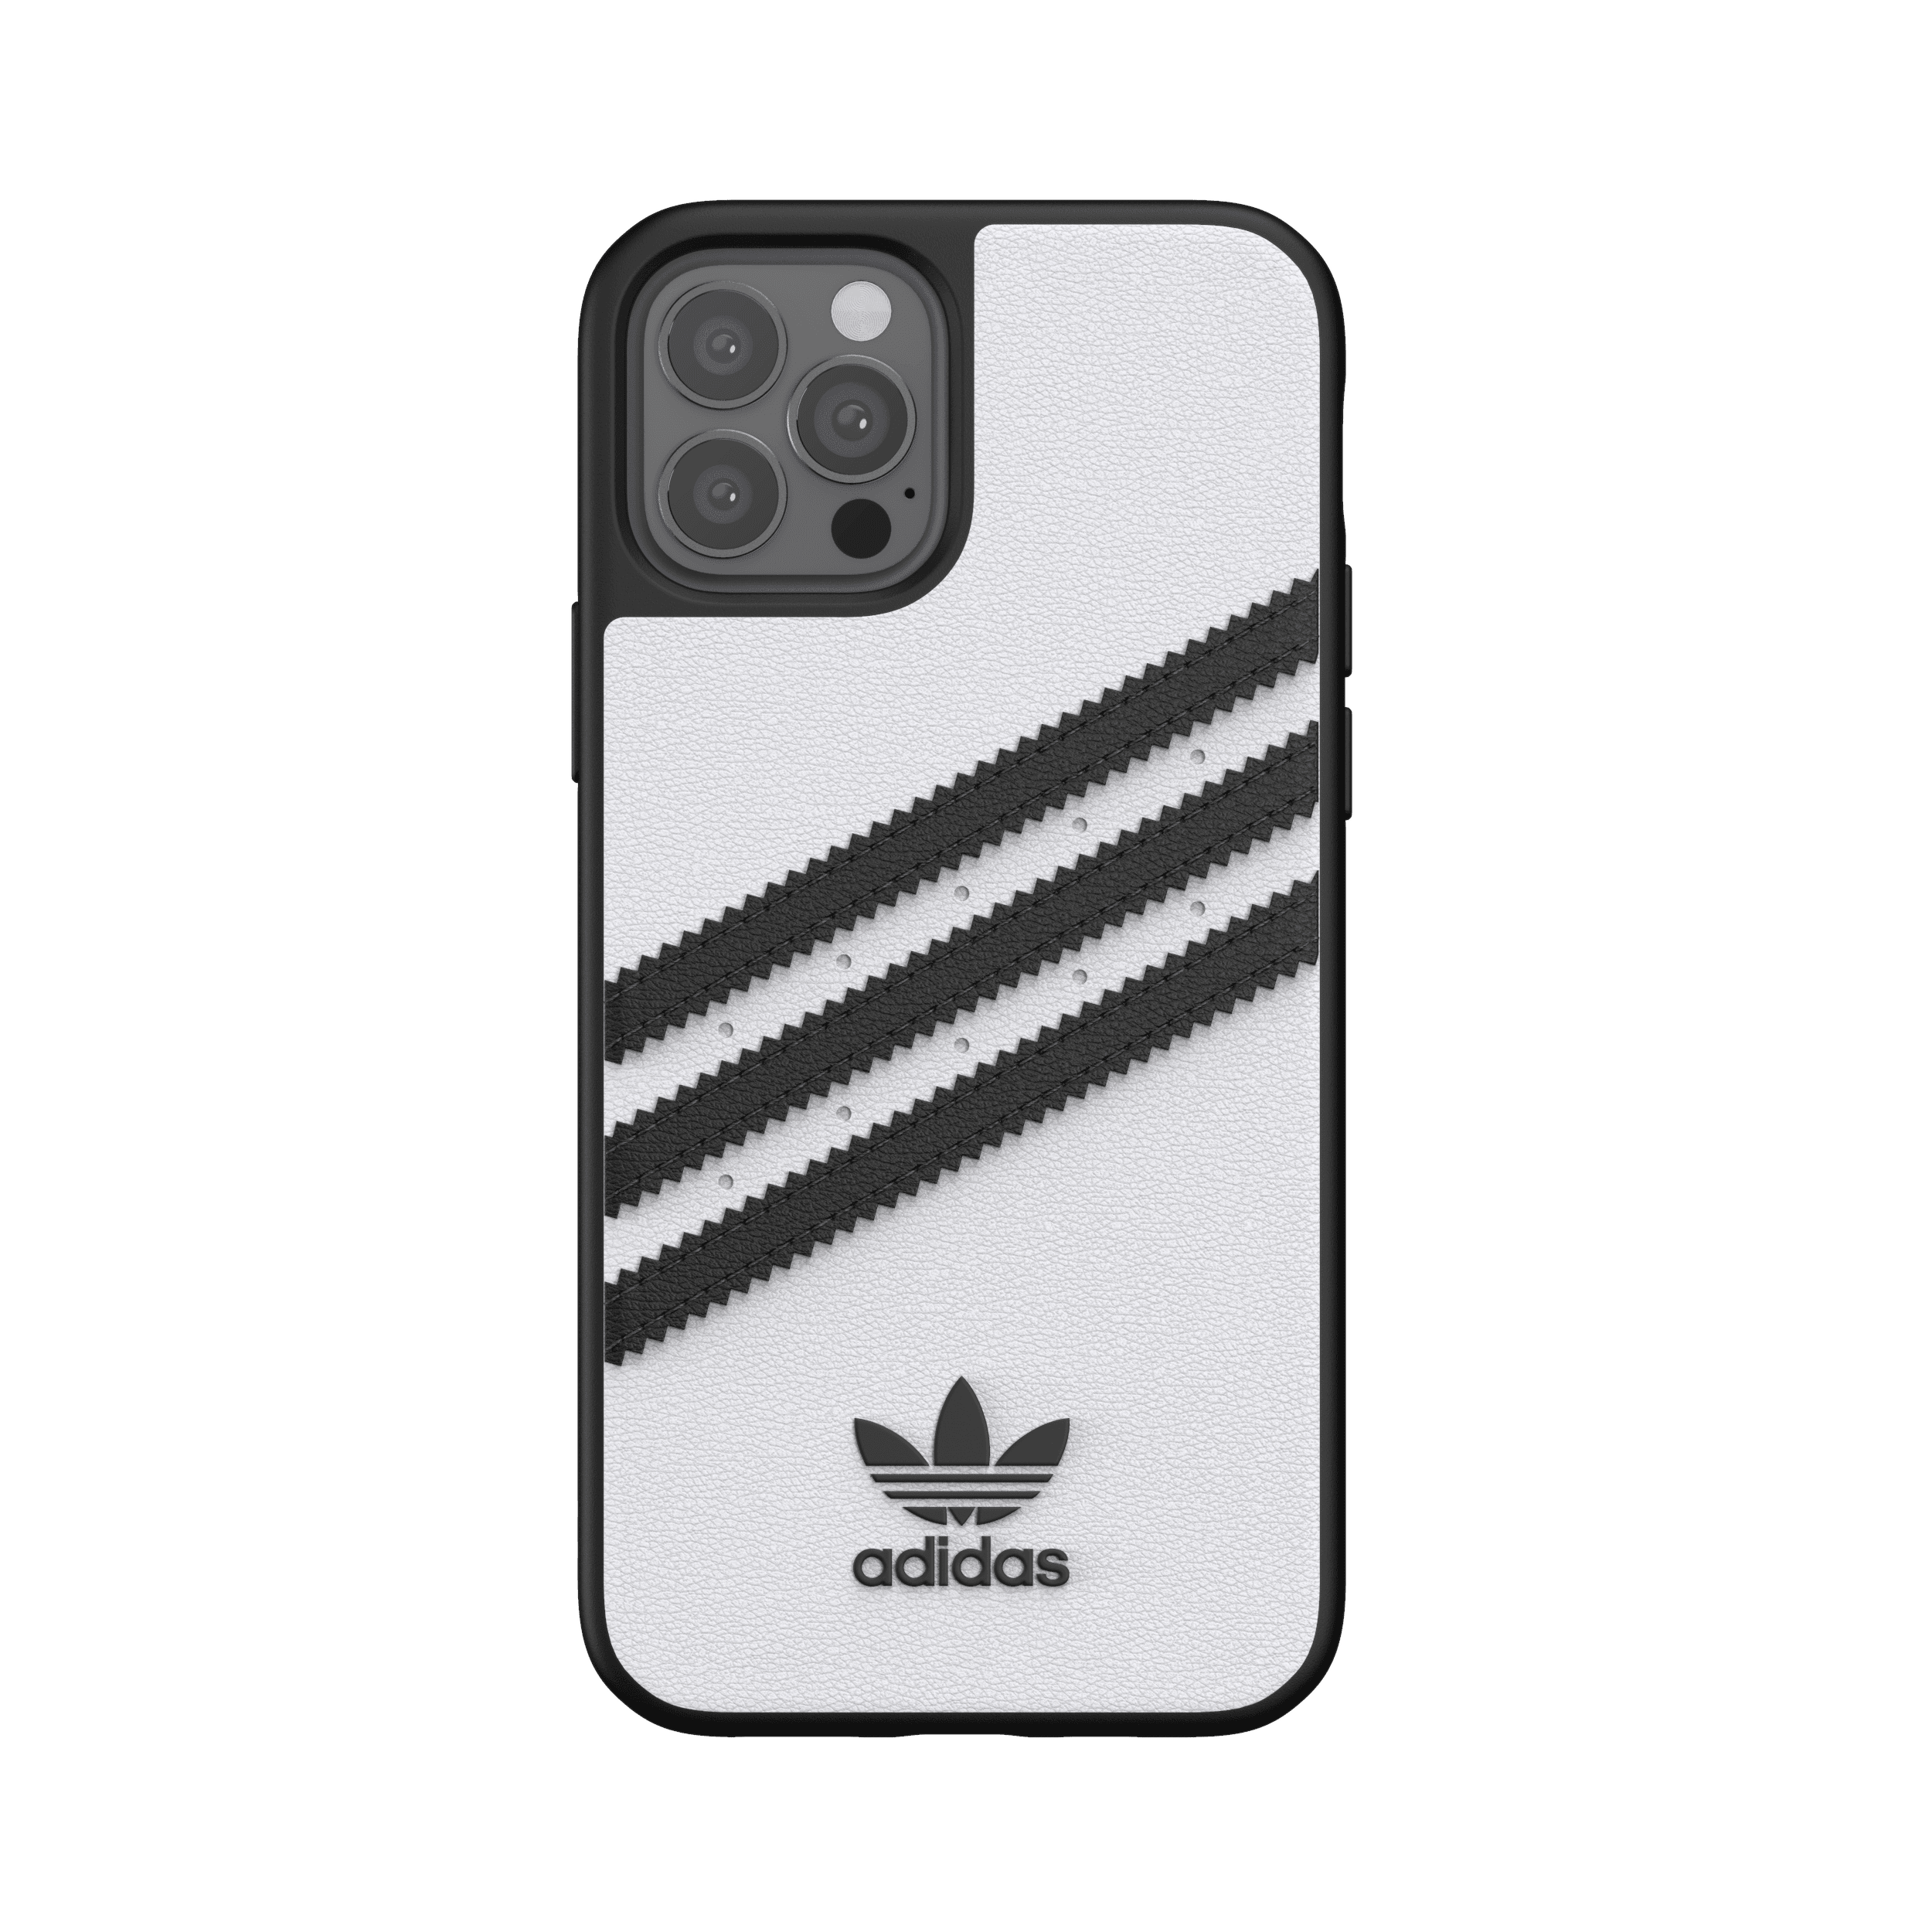 adidas samba apple iphone 12 12 pro moulded case back cover w 3 stripes trefoil design scratch drop protection w tpu bumper wireless charging compatible white black